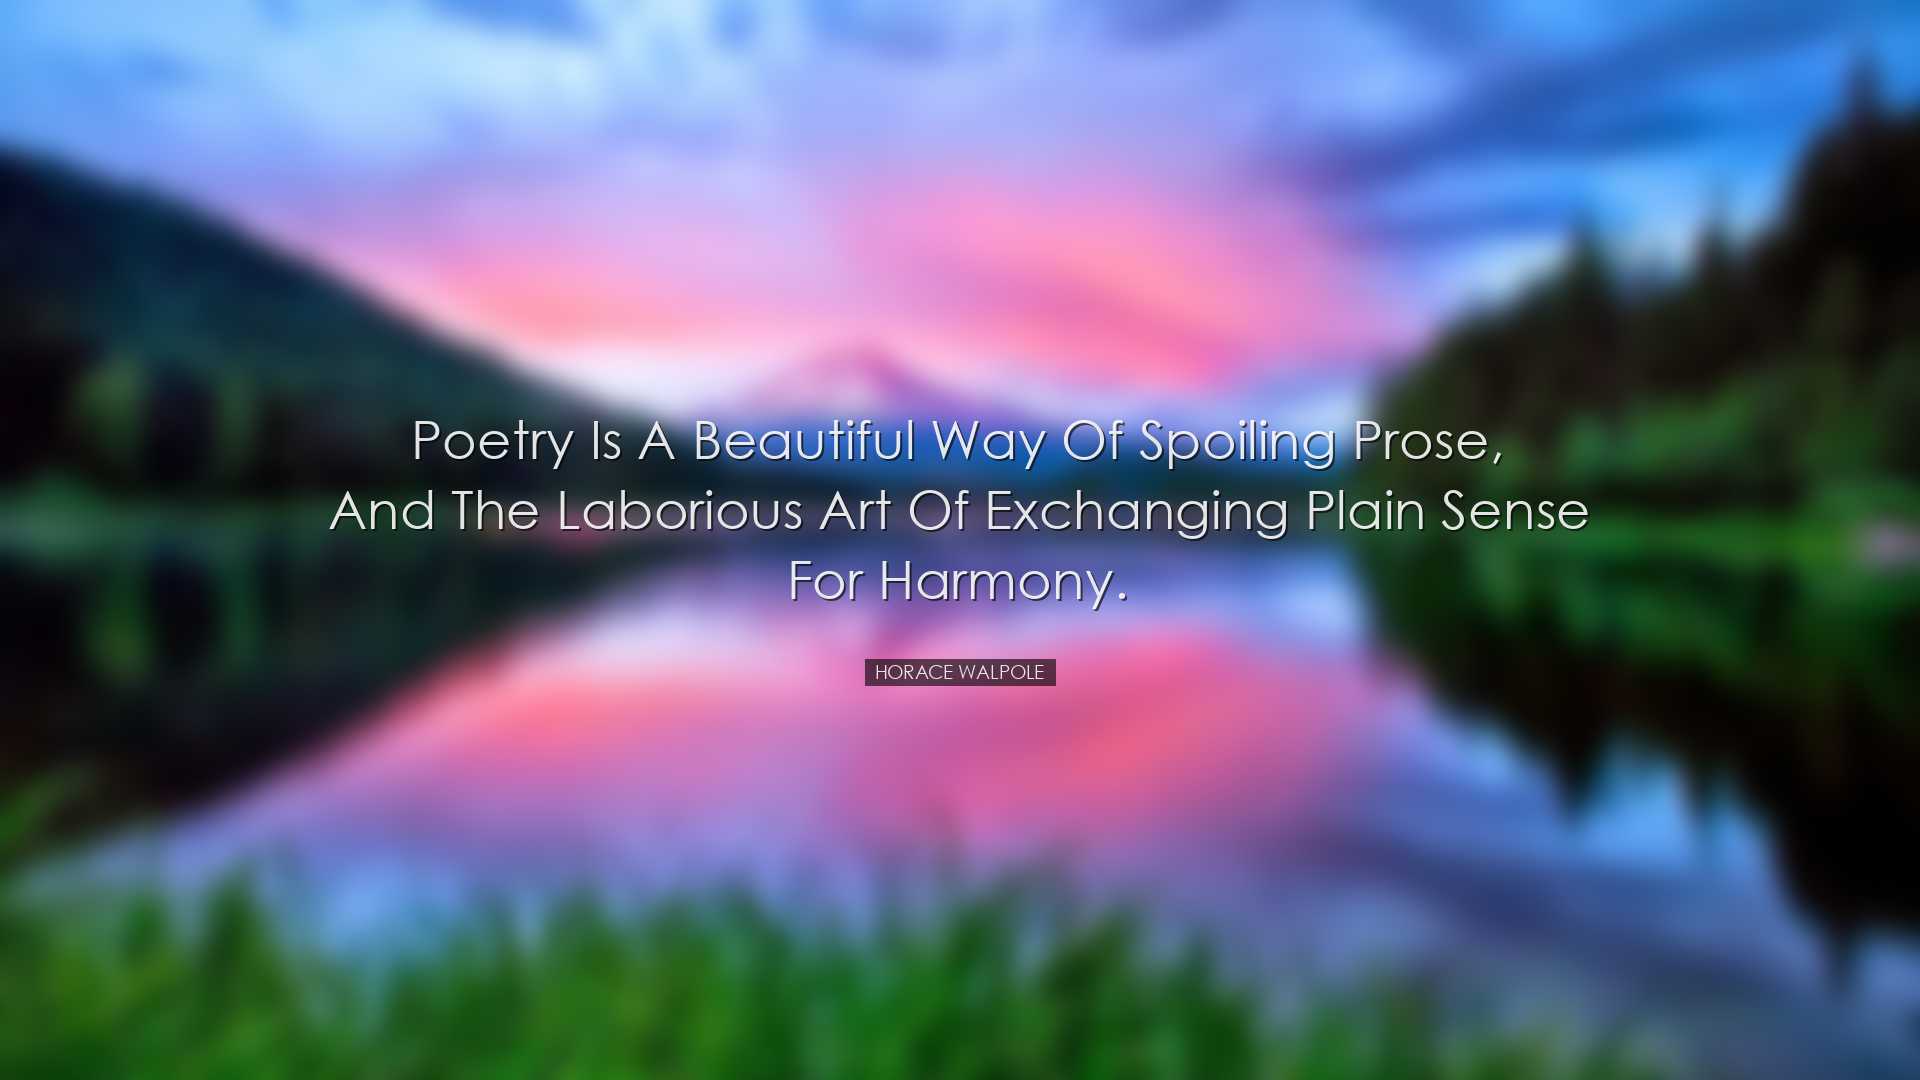 Poetry is a beautiful way of spoiling prose, and the laborious art